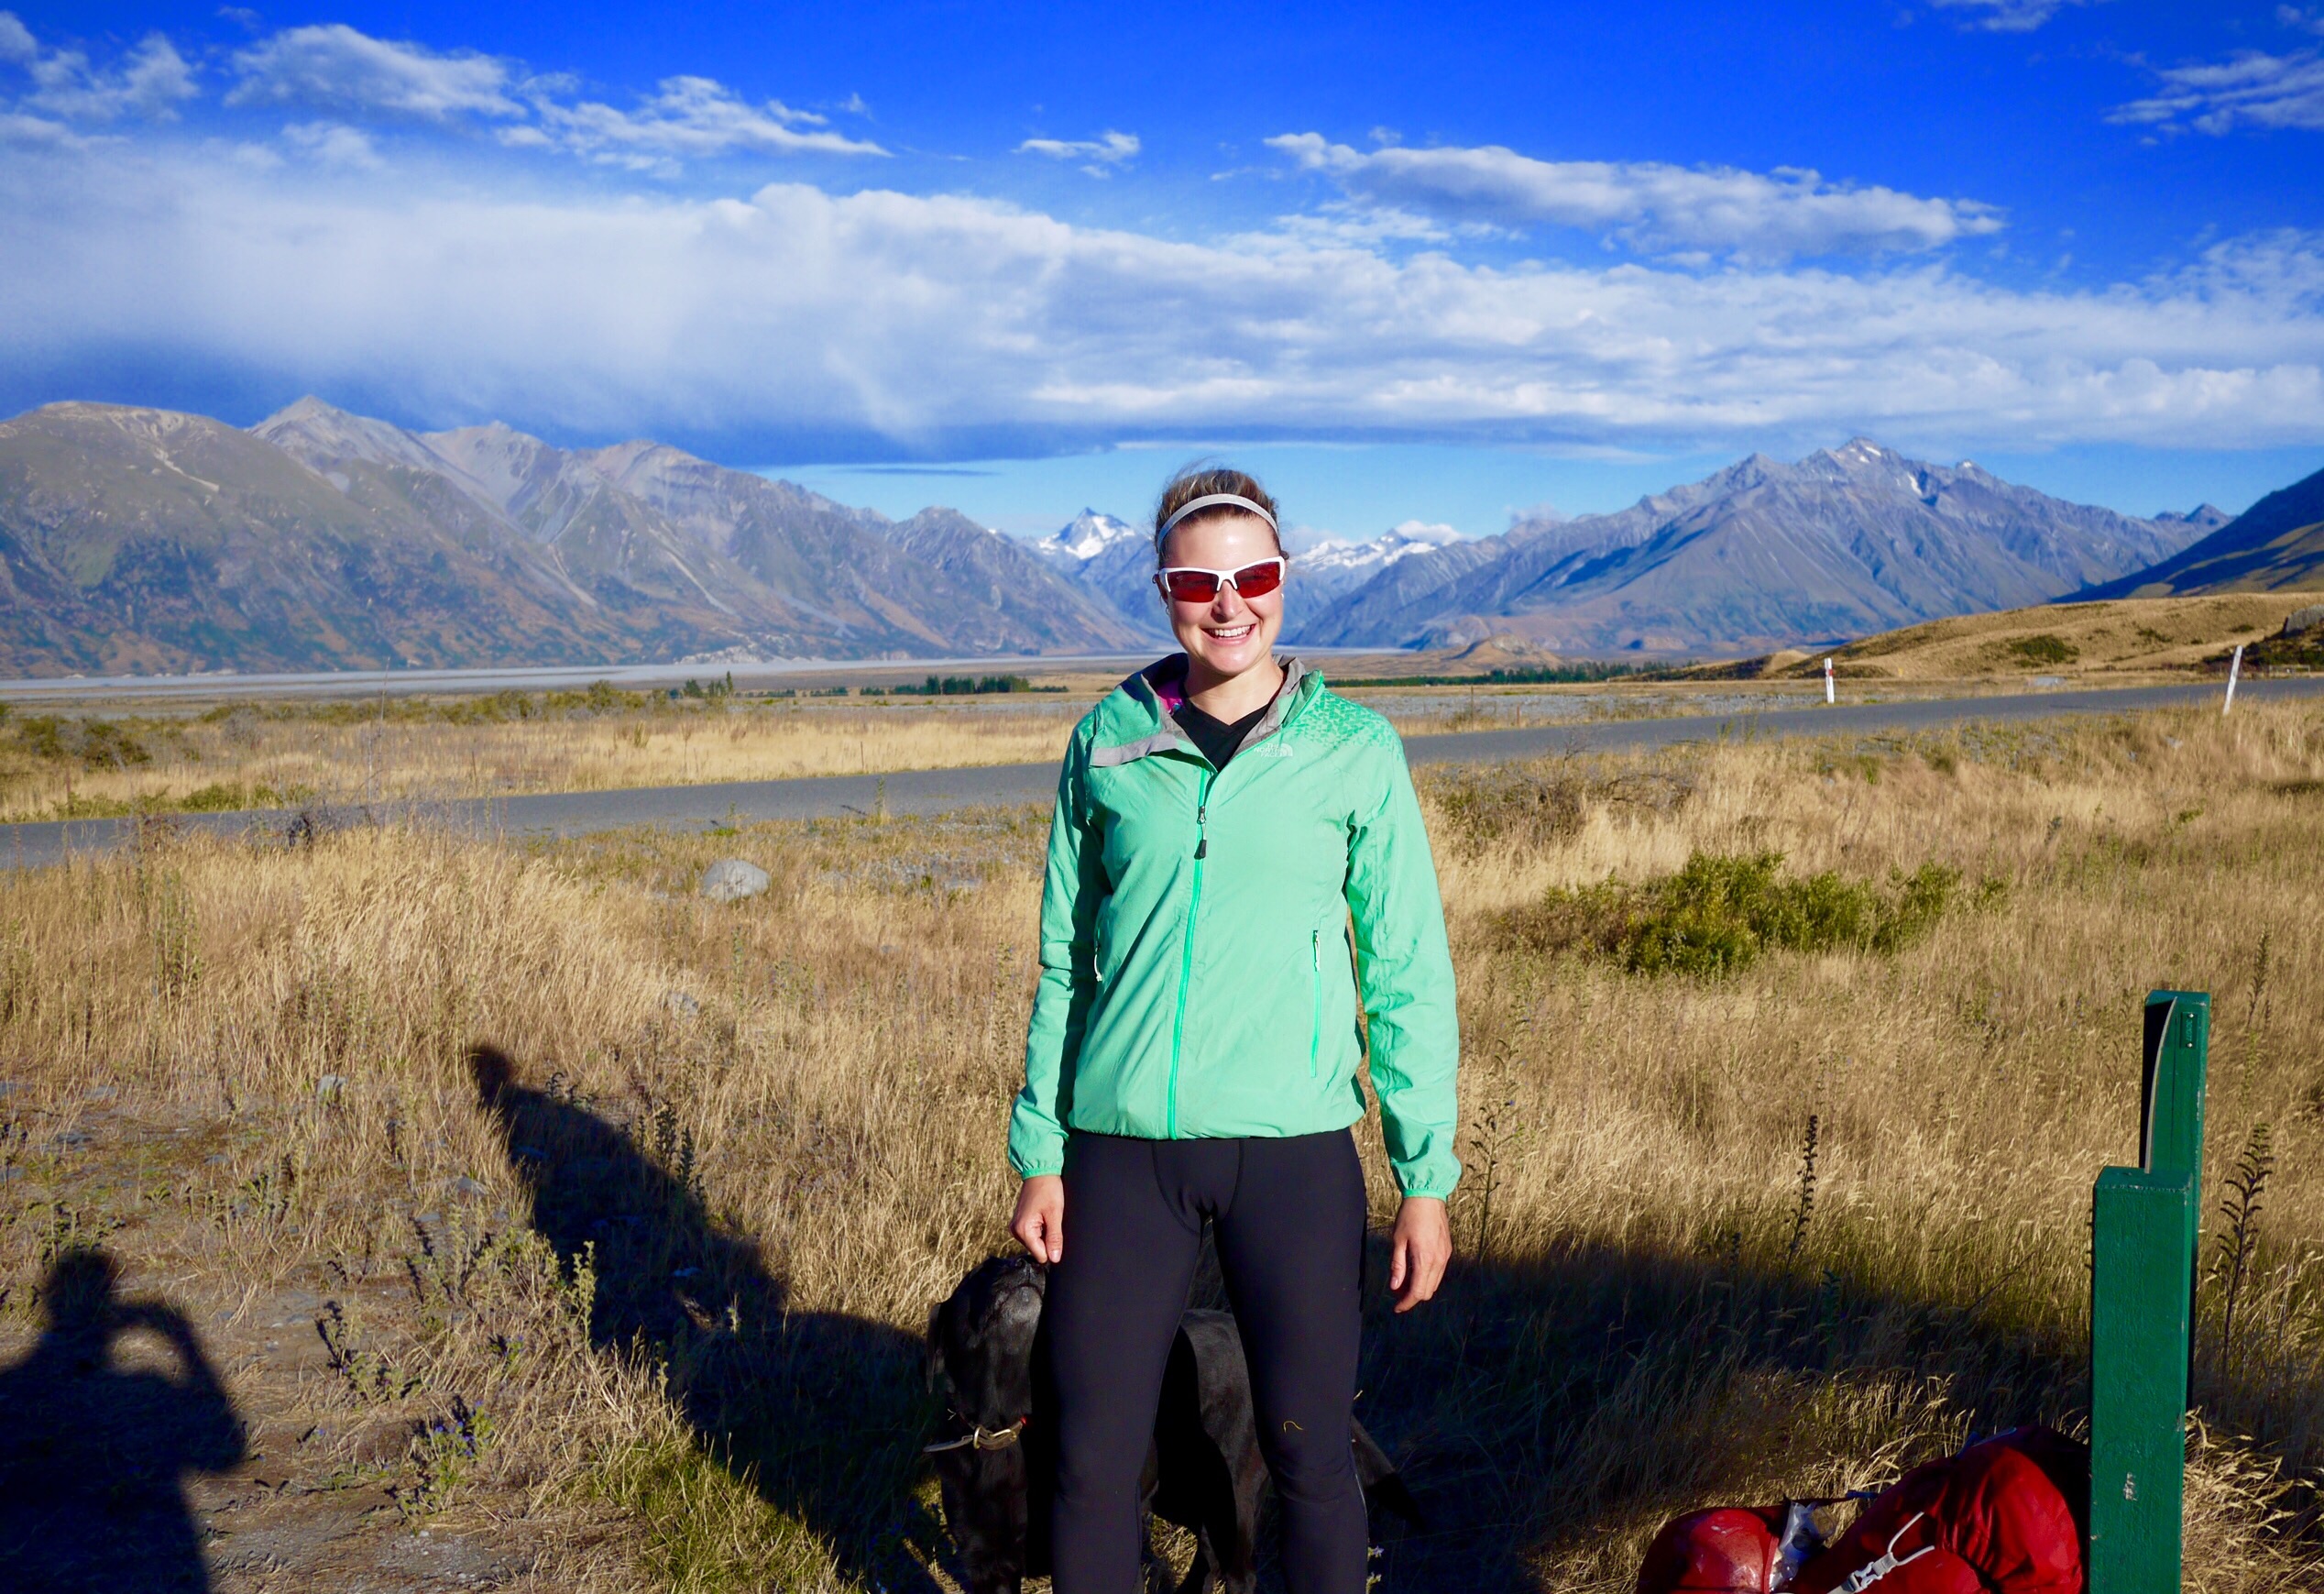 Setting off from the North side of the Rangitata river